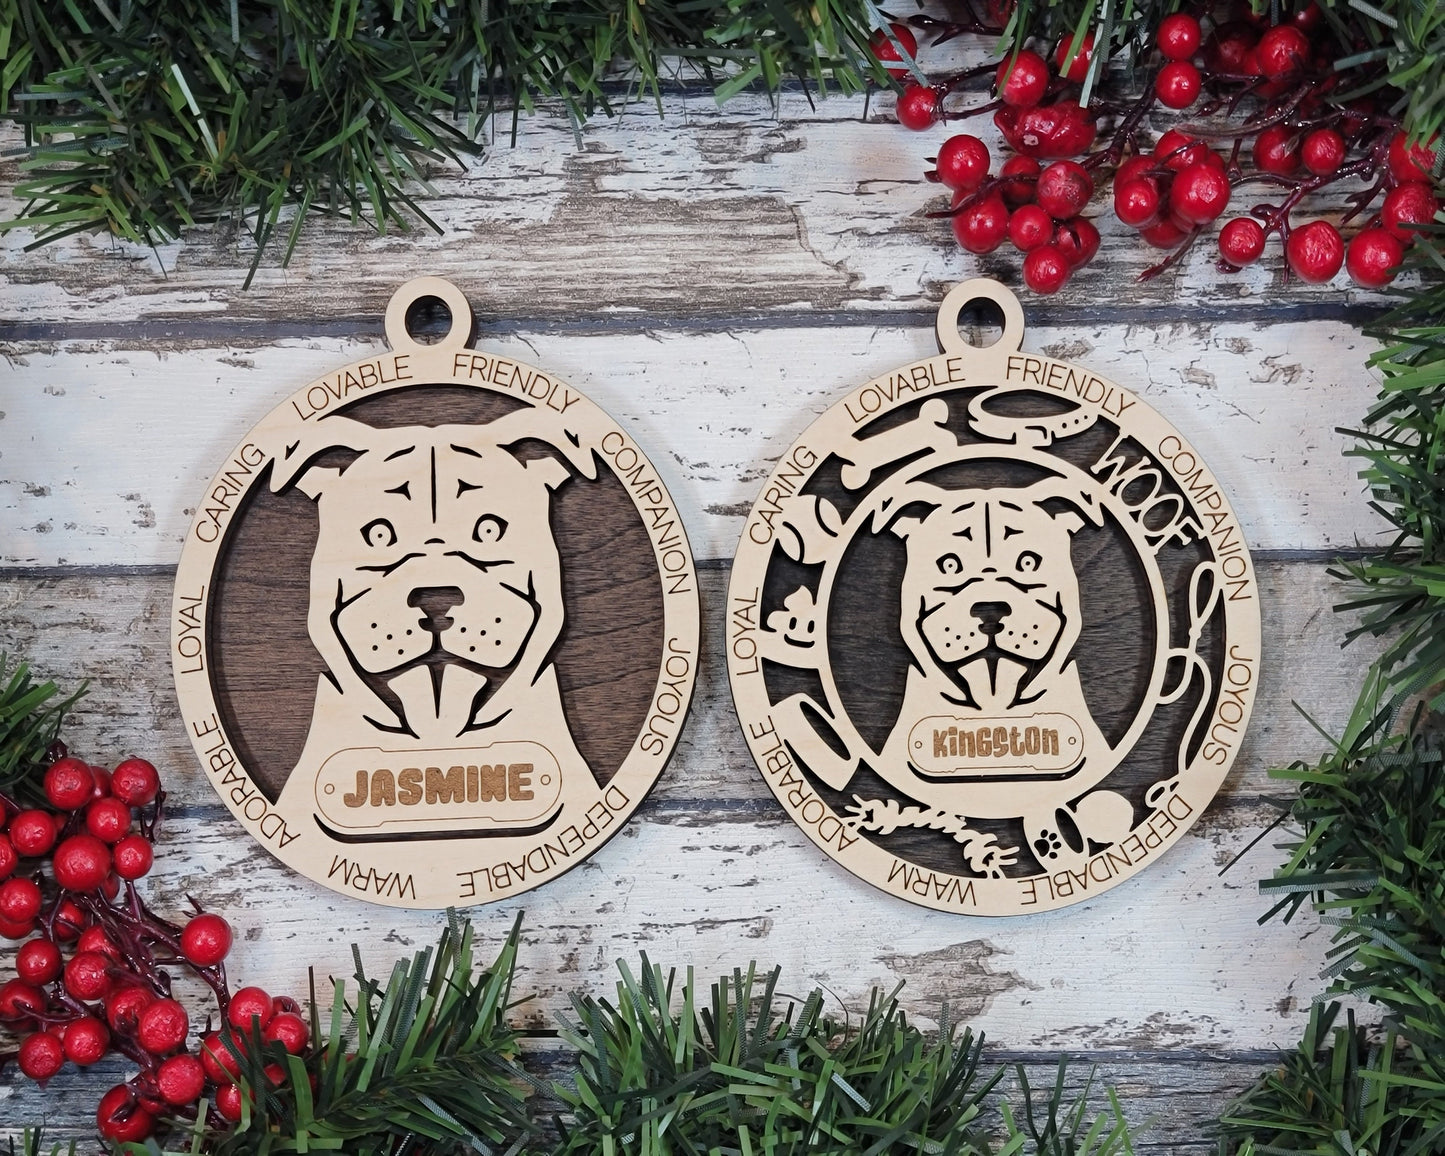 Staffordshire Bull Terrier - Adorable Dog Ornaments - 2 Ornaments included - SVG, PDF, AI File Download - Sized for Glowforge